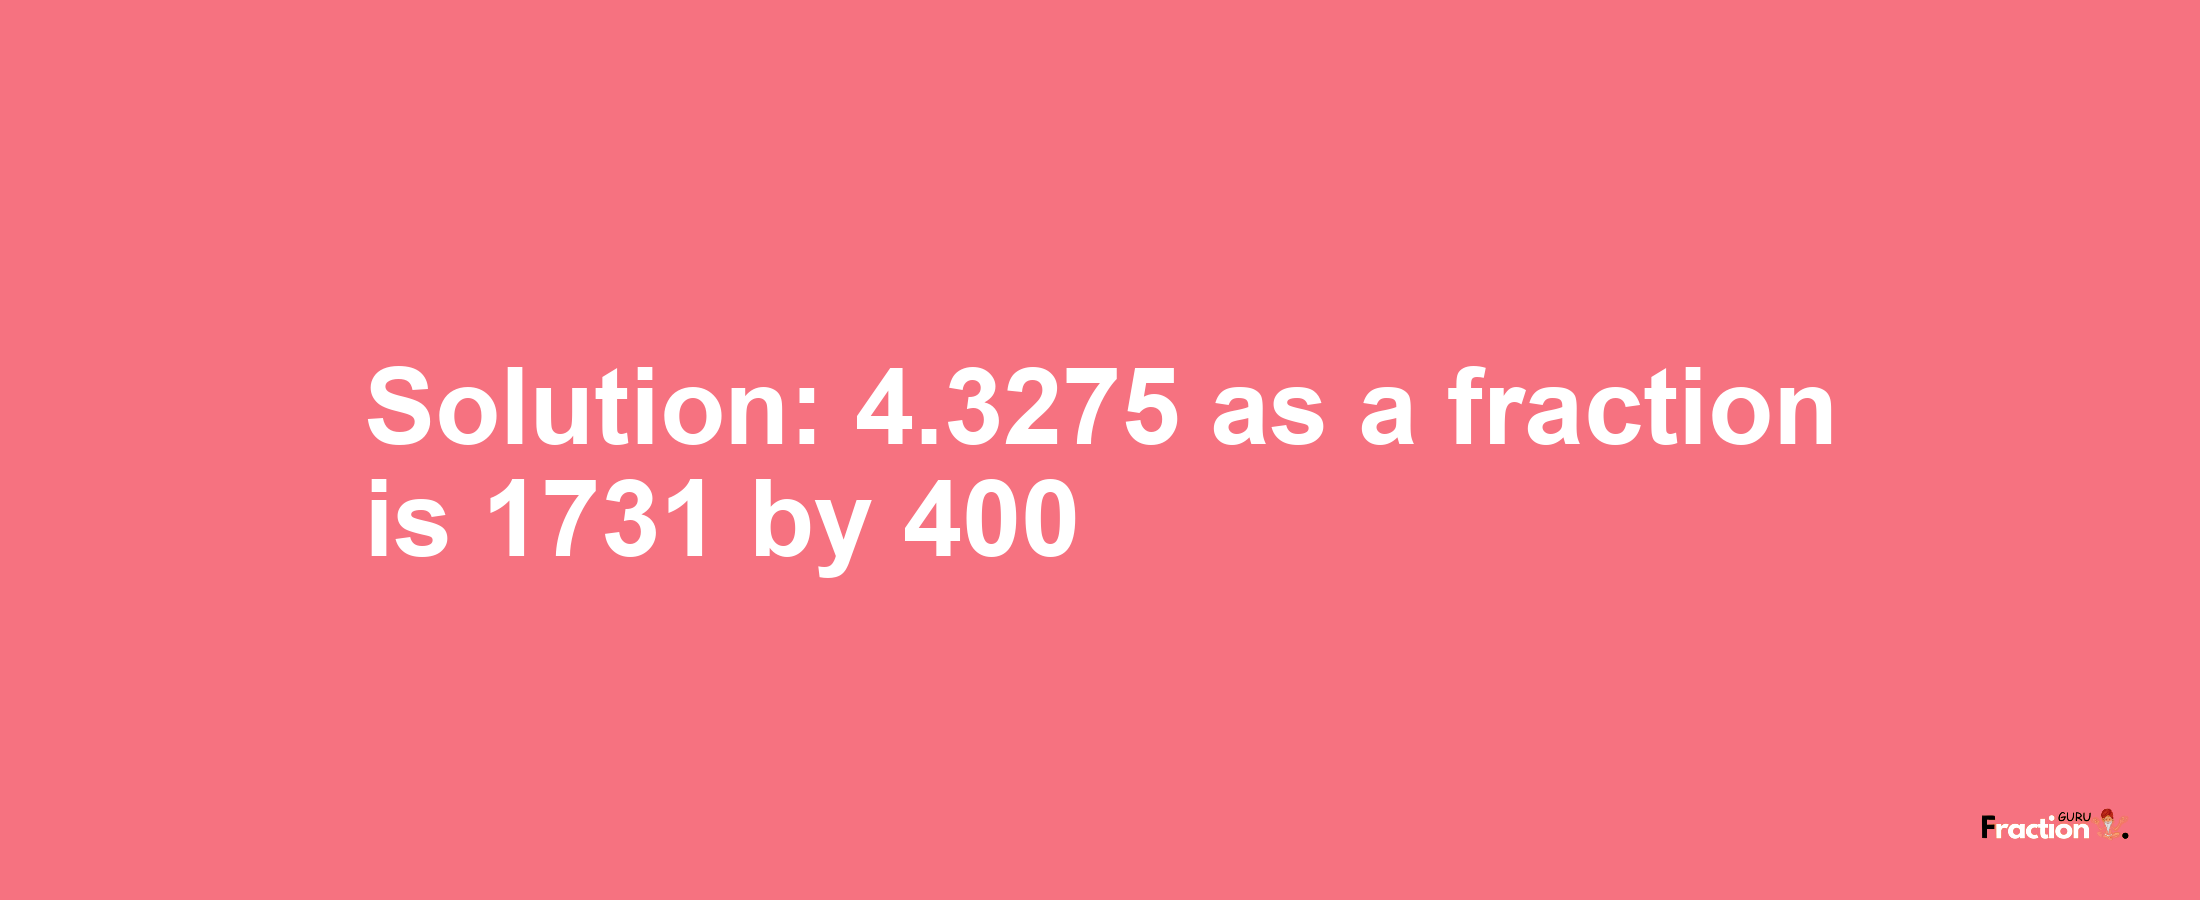 Solution:4.3275 as a fraction is 1731/400